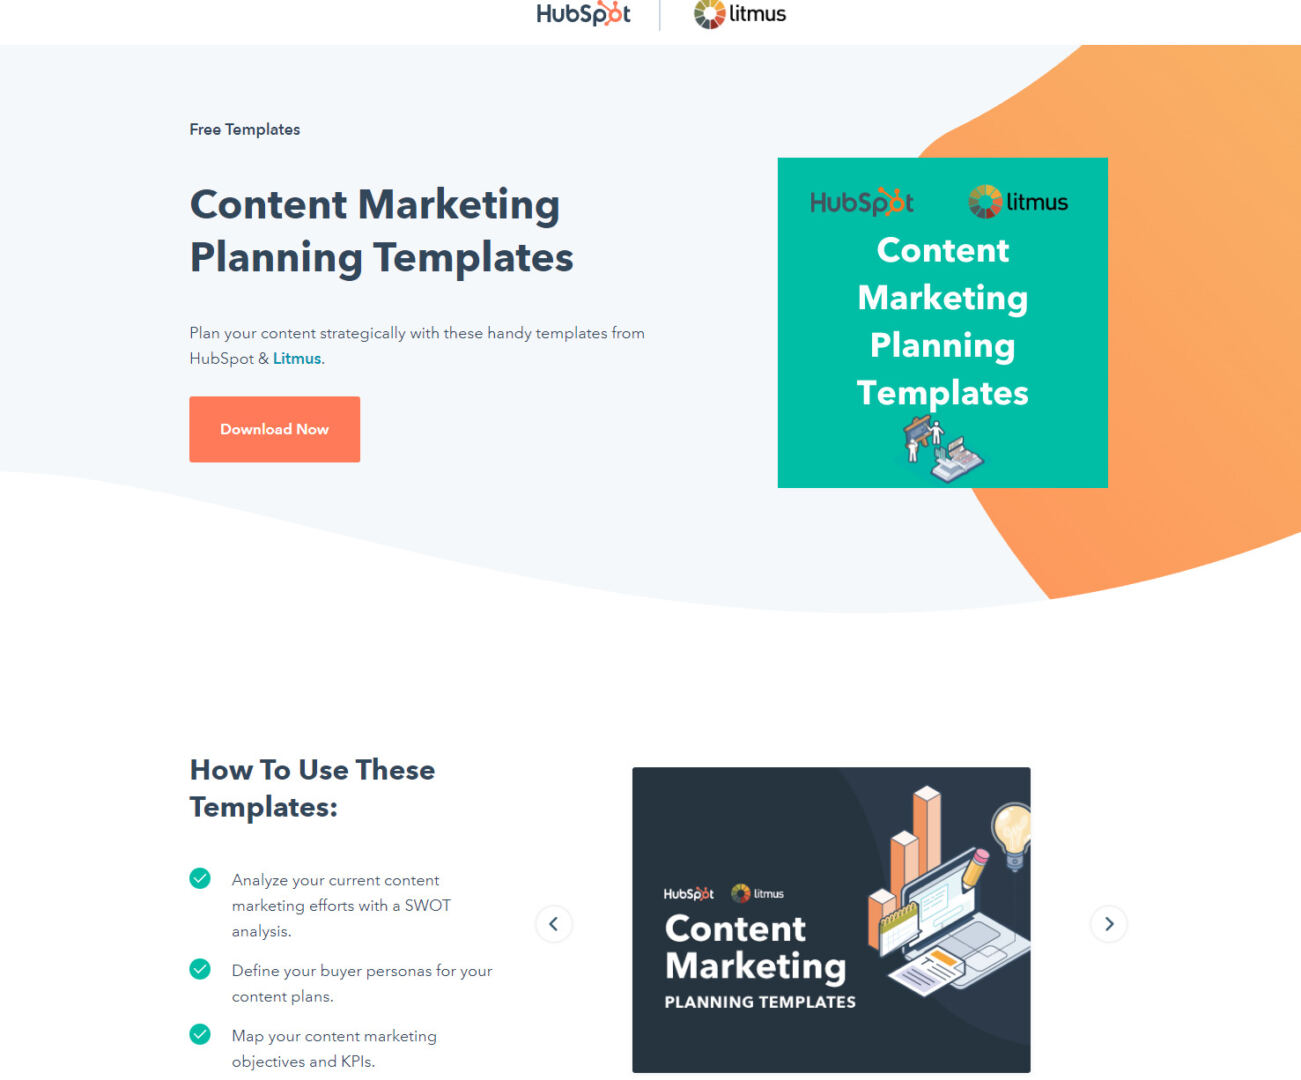 HubSpot's free content planning templates